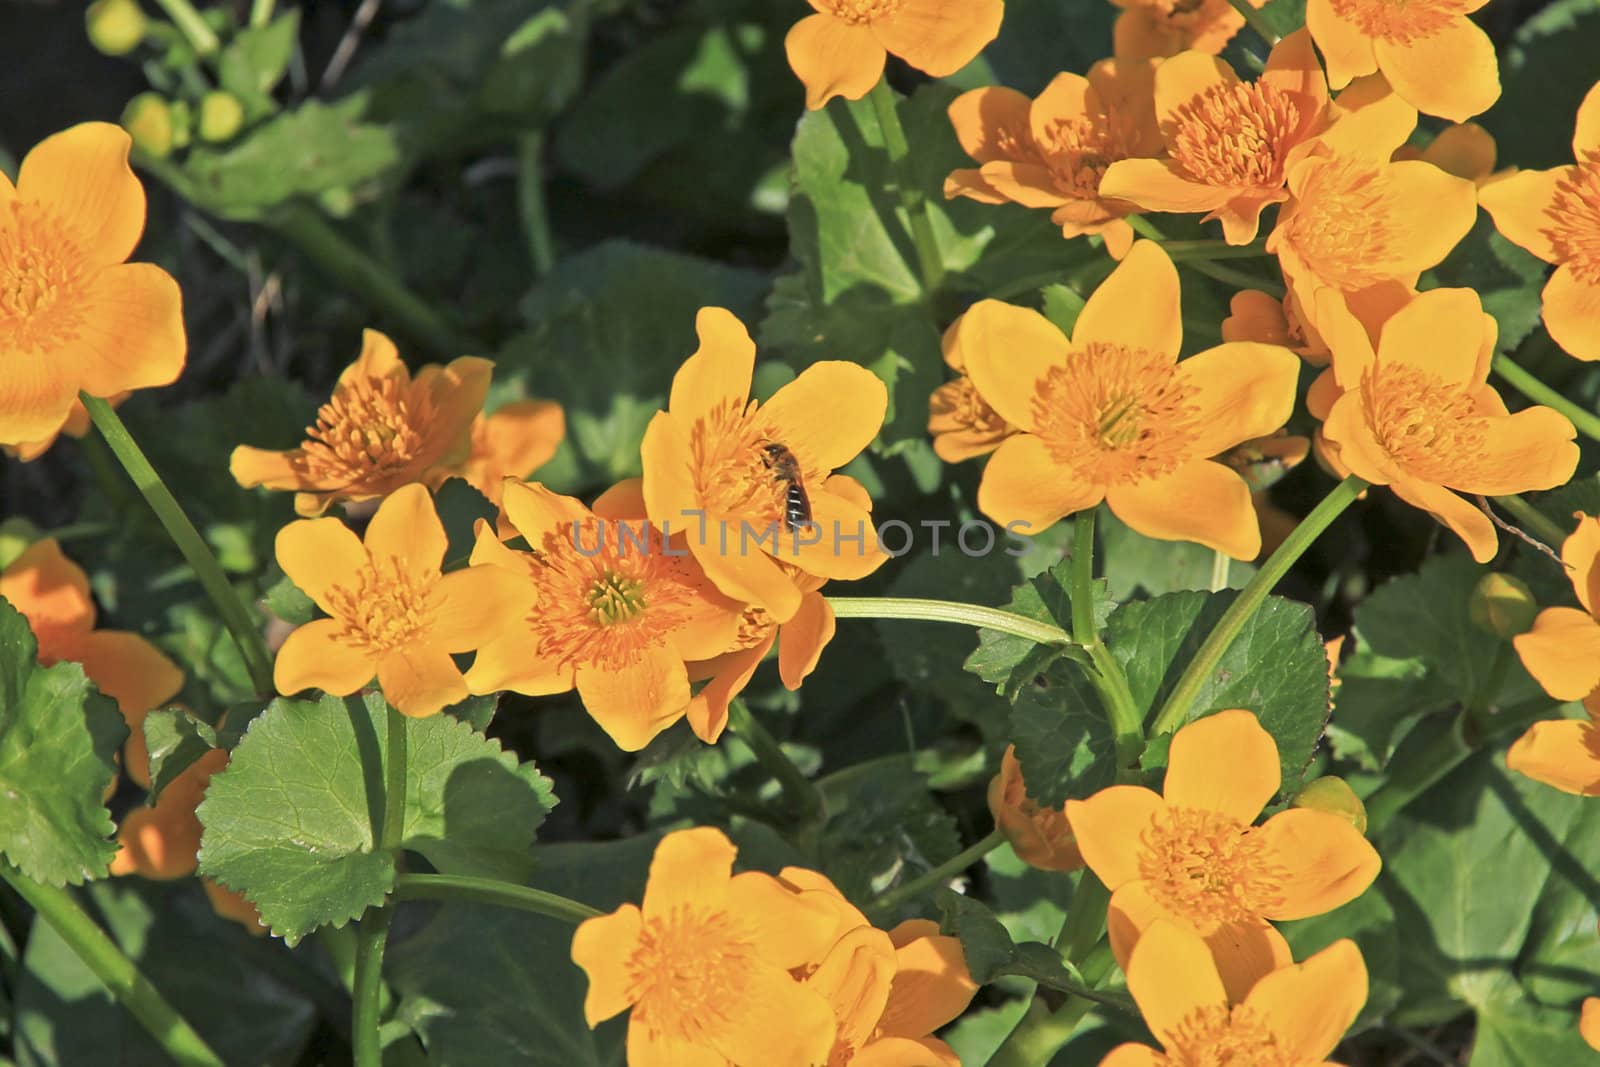 Closeup of orange-colored flowers with a bee